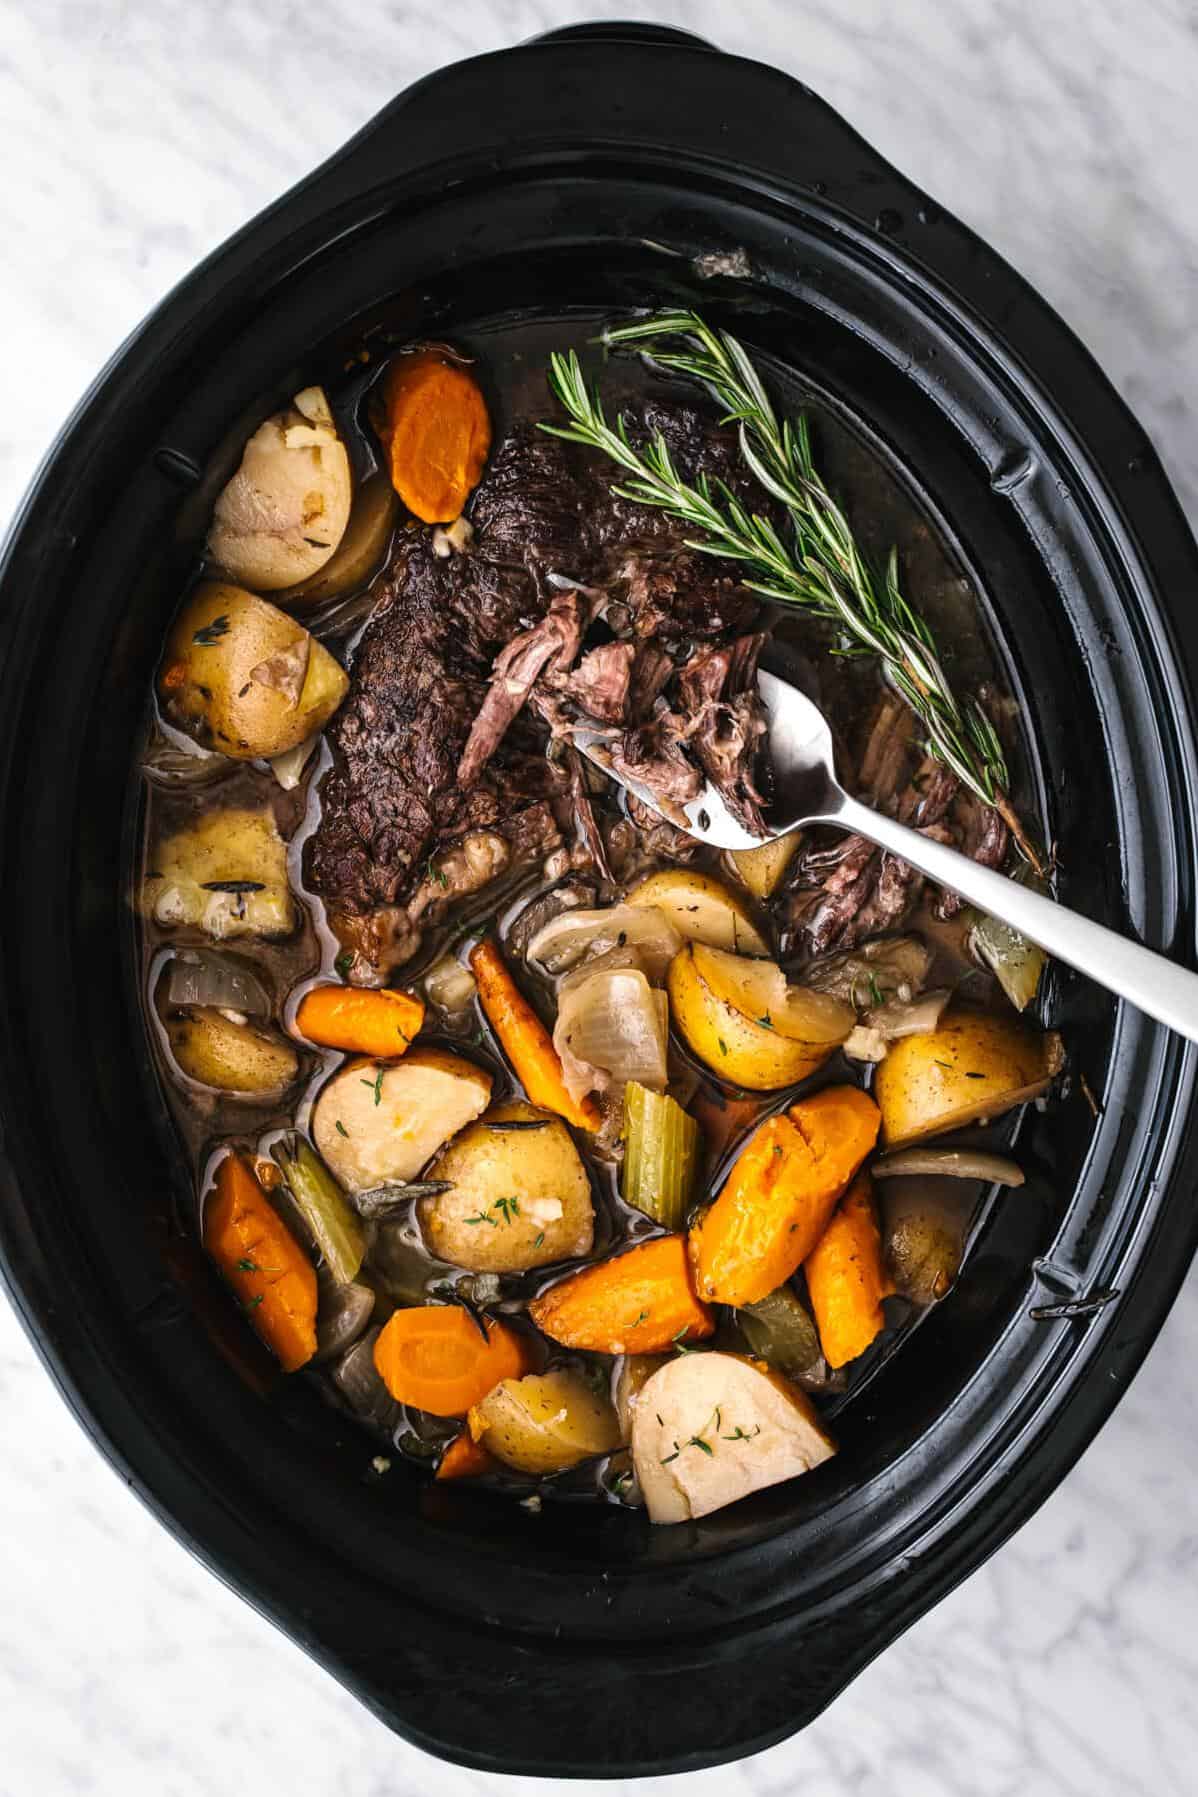  A melt-in-your-mouth pot roast that will have your taste buds dancing!